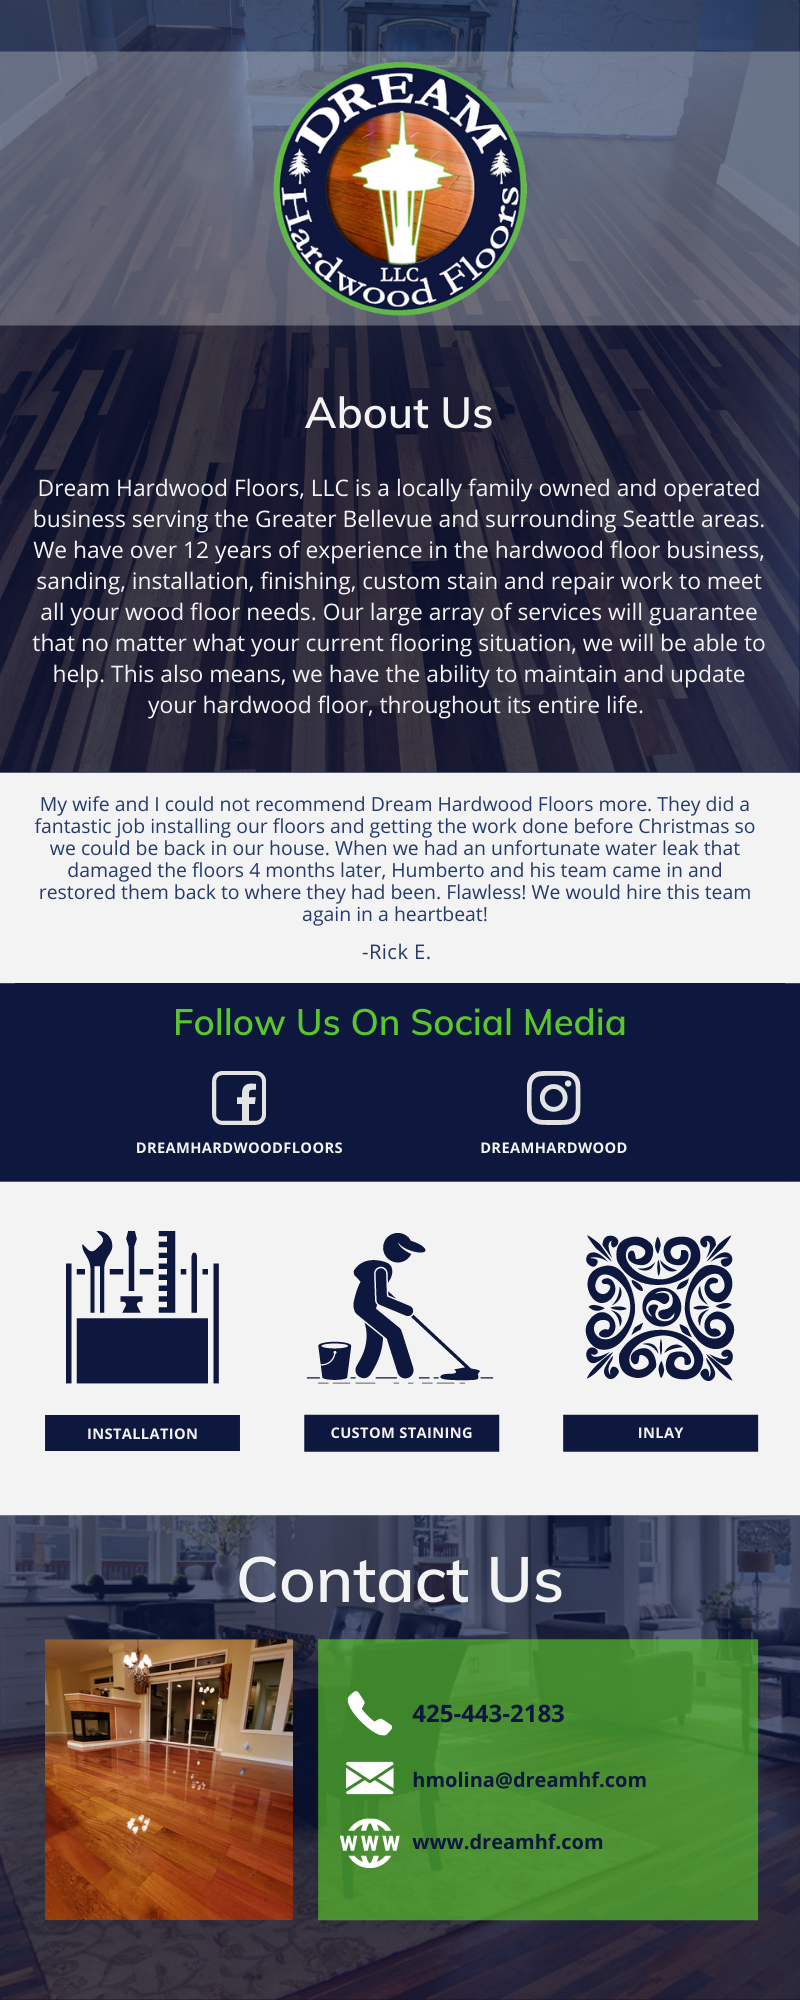 about us infographic